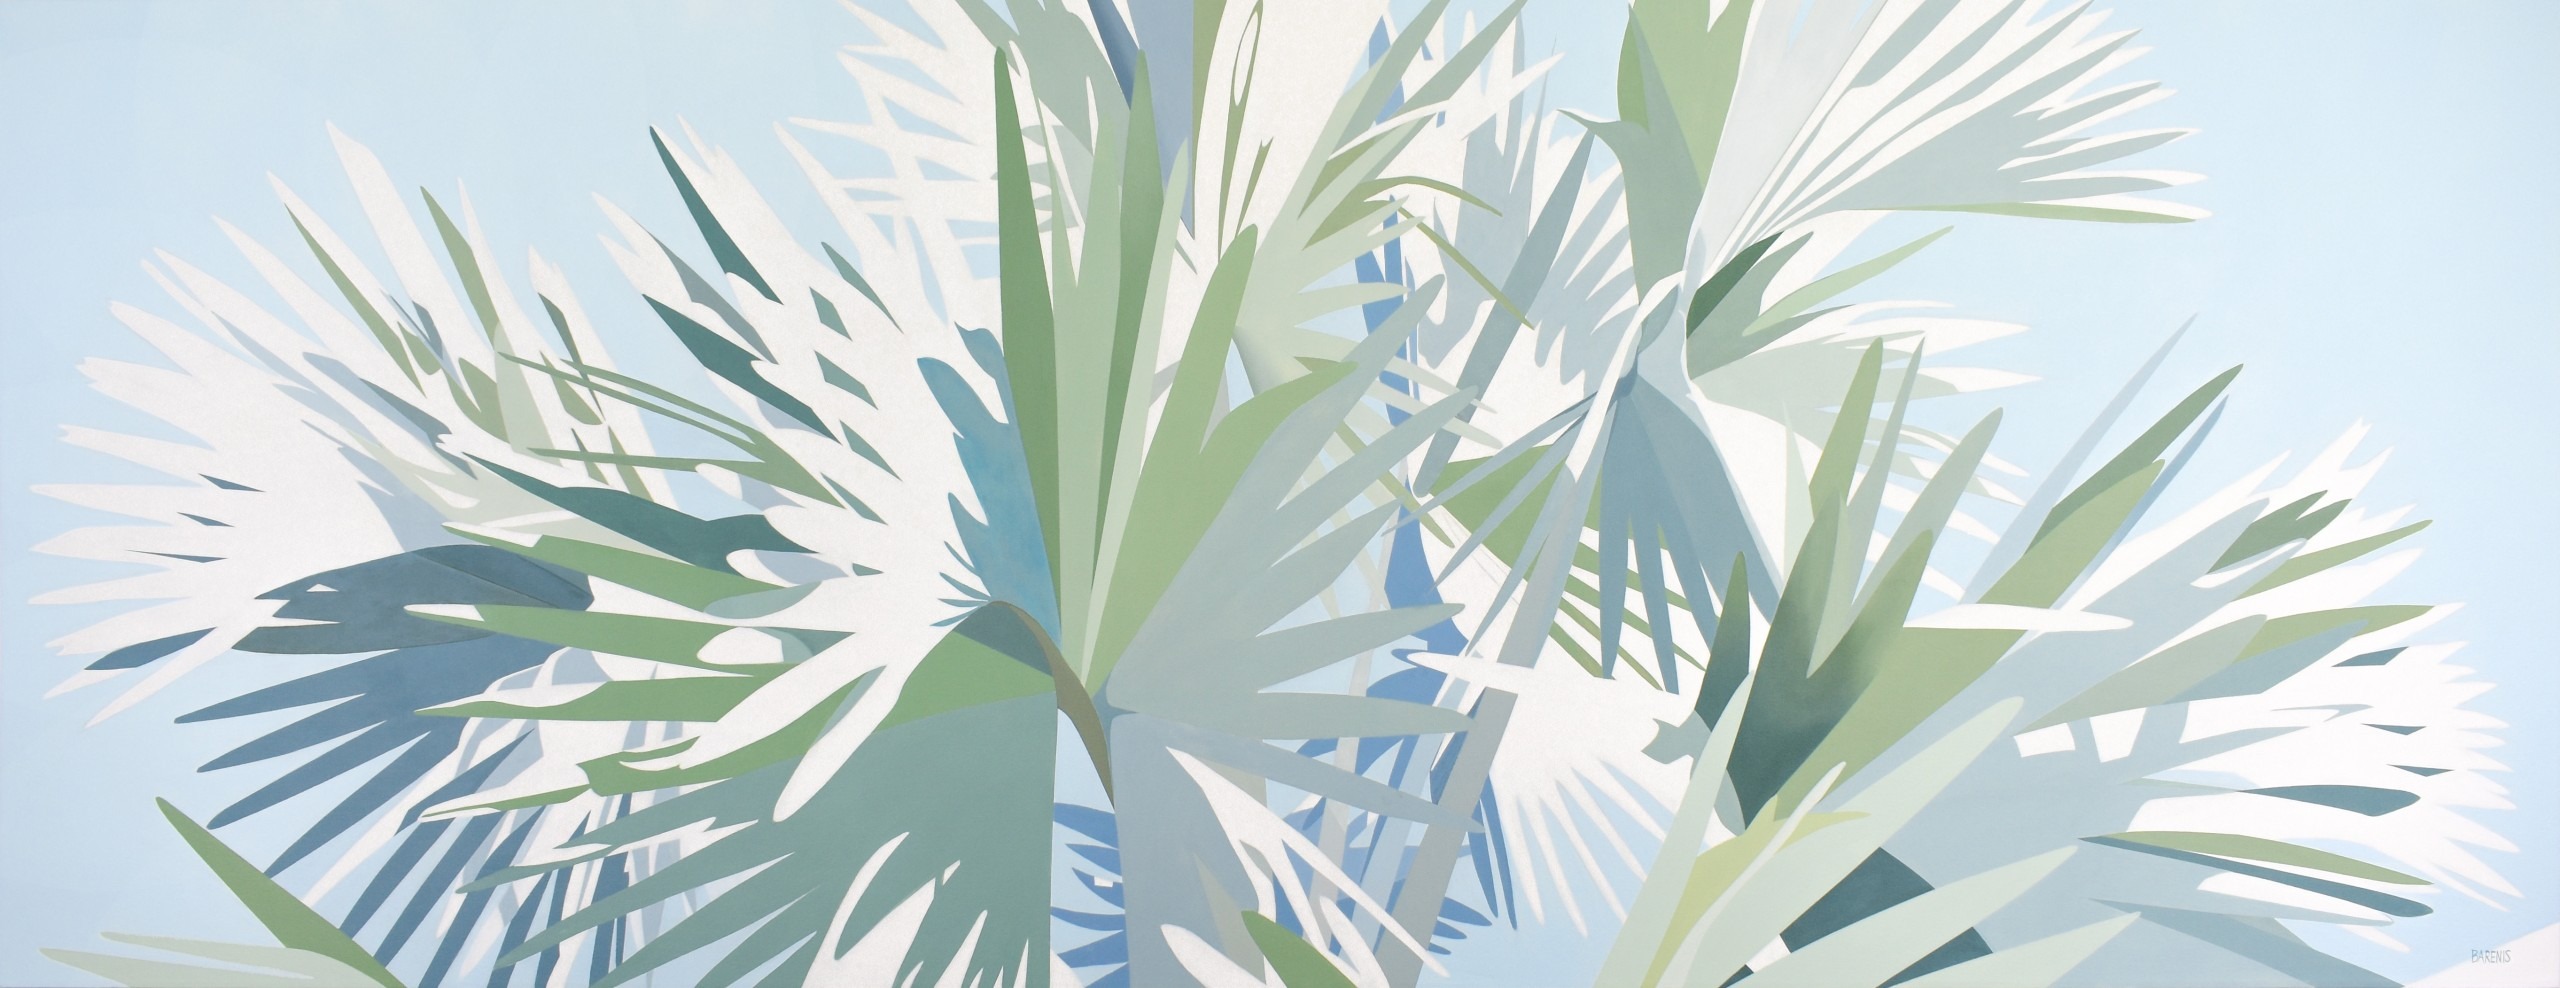 Tangled Up in Blue is shown. It is an acrylic painting of abstracted blue, green, and white palm fronds.